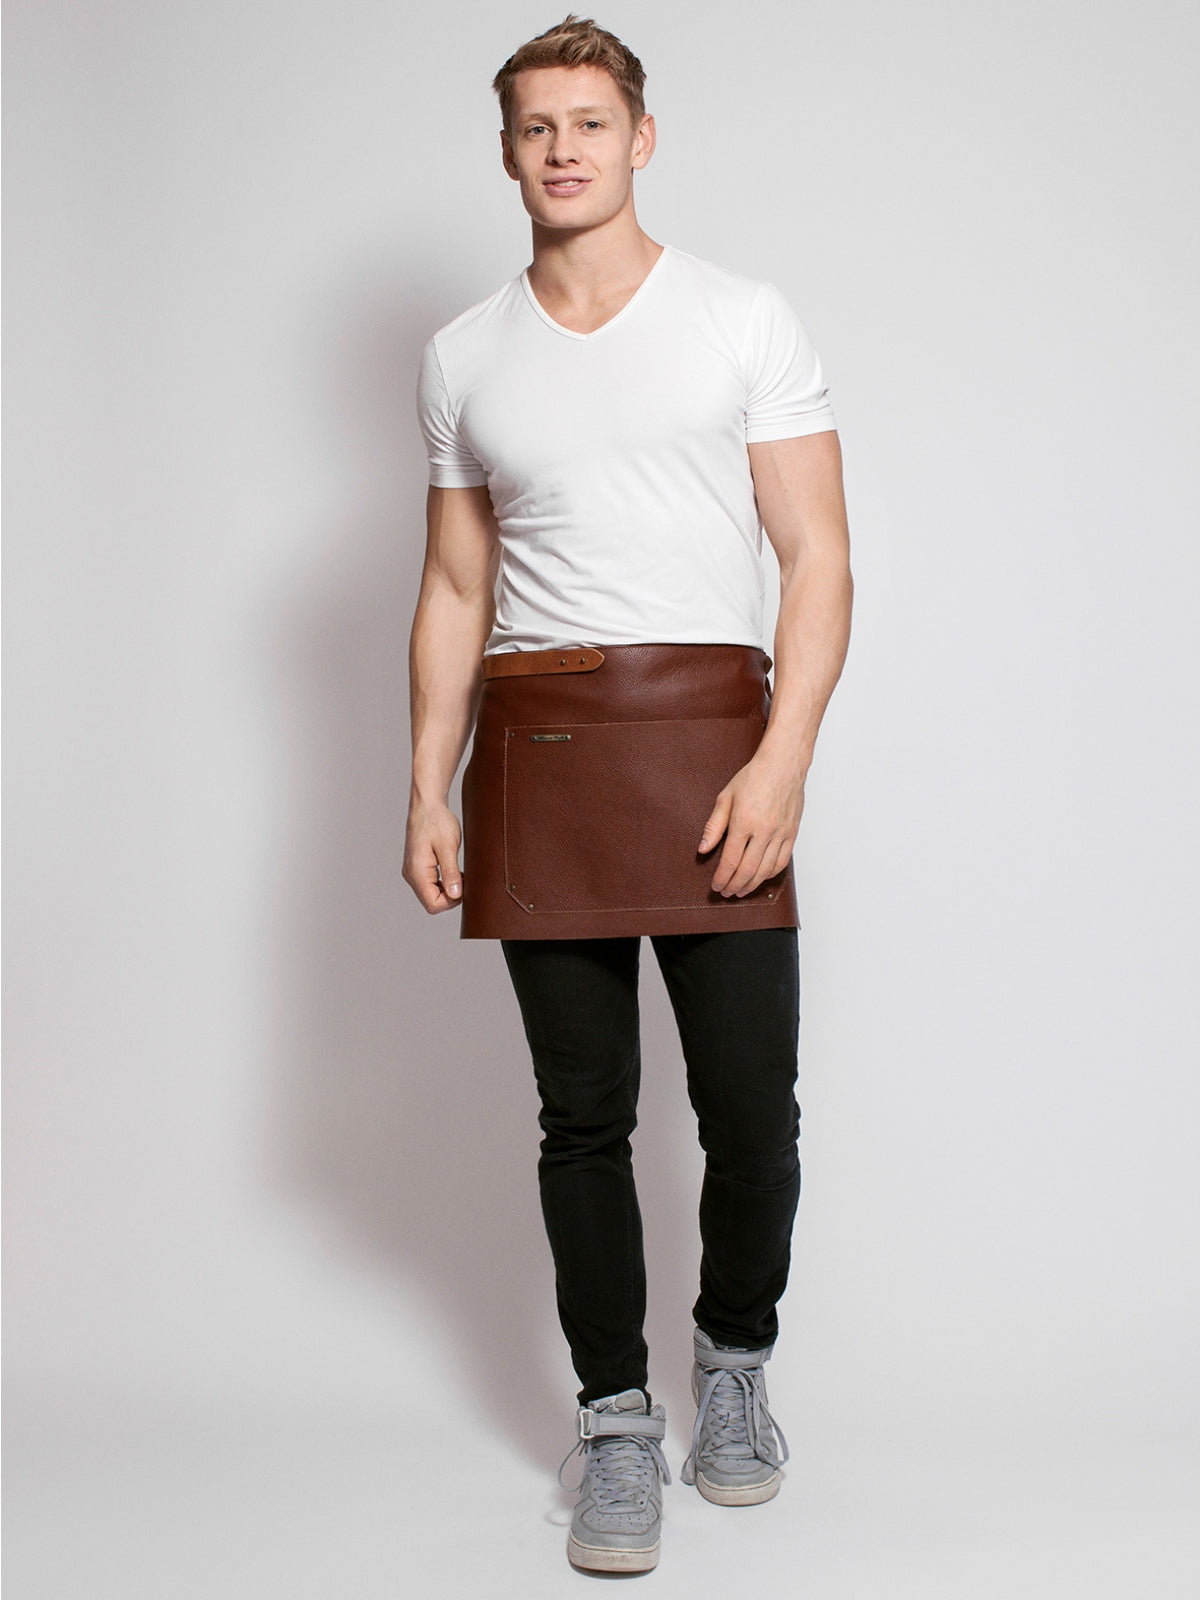 Leather Waist Apron Deluxe Brown by STW -  ChefsCotton